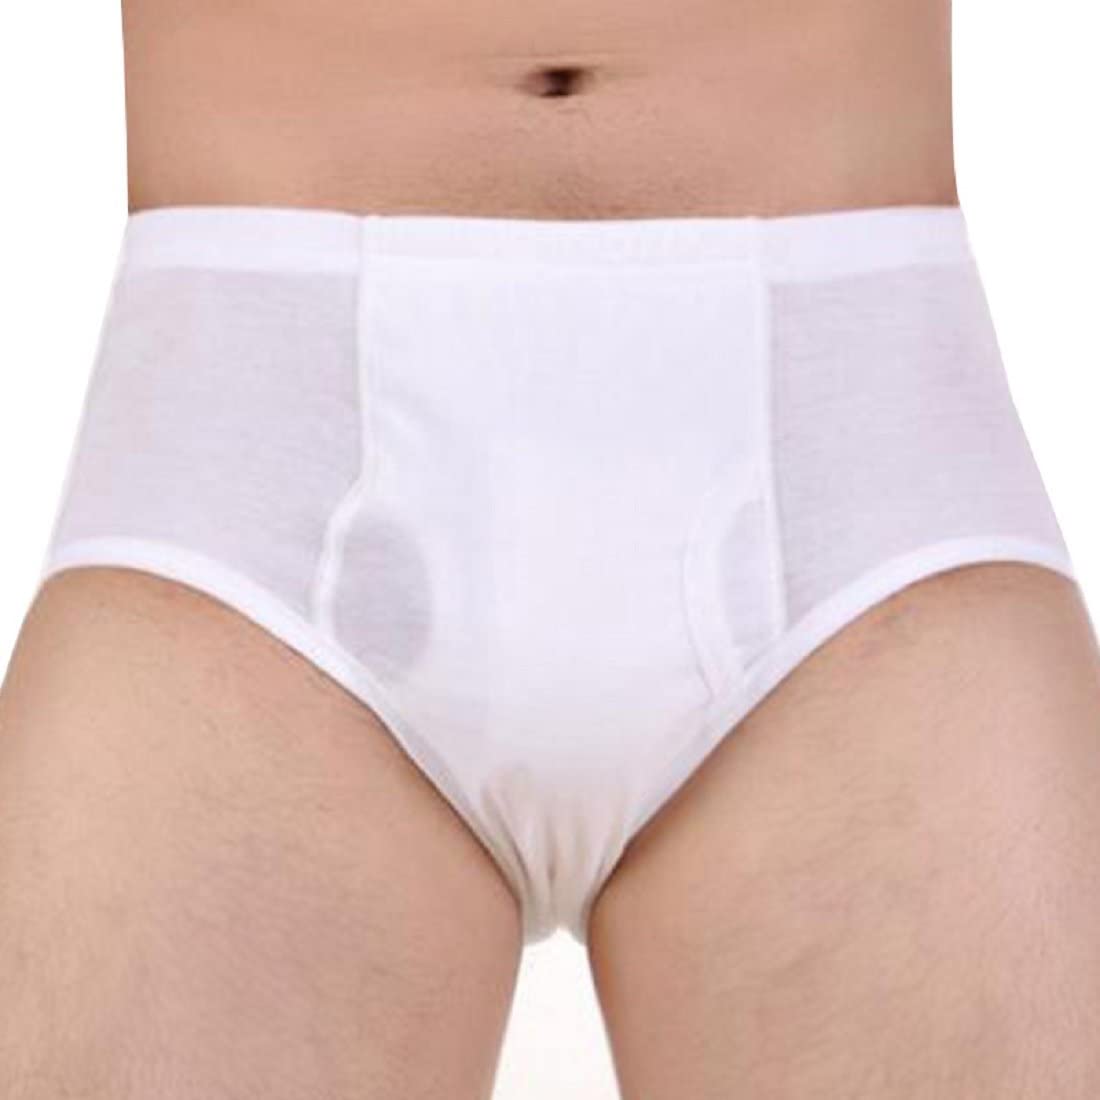 Mens Washable Reusable Urinary Incontinence Cotton Underwear Brief